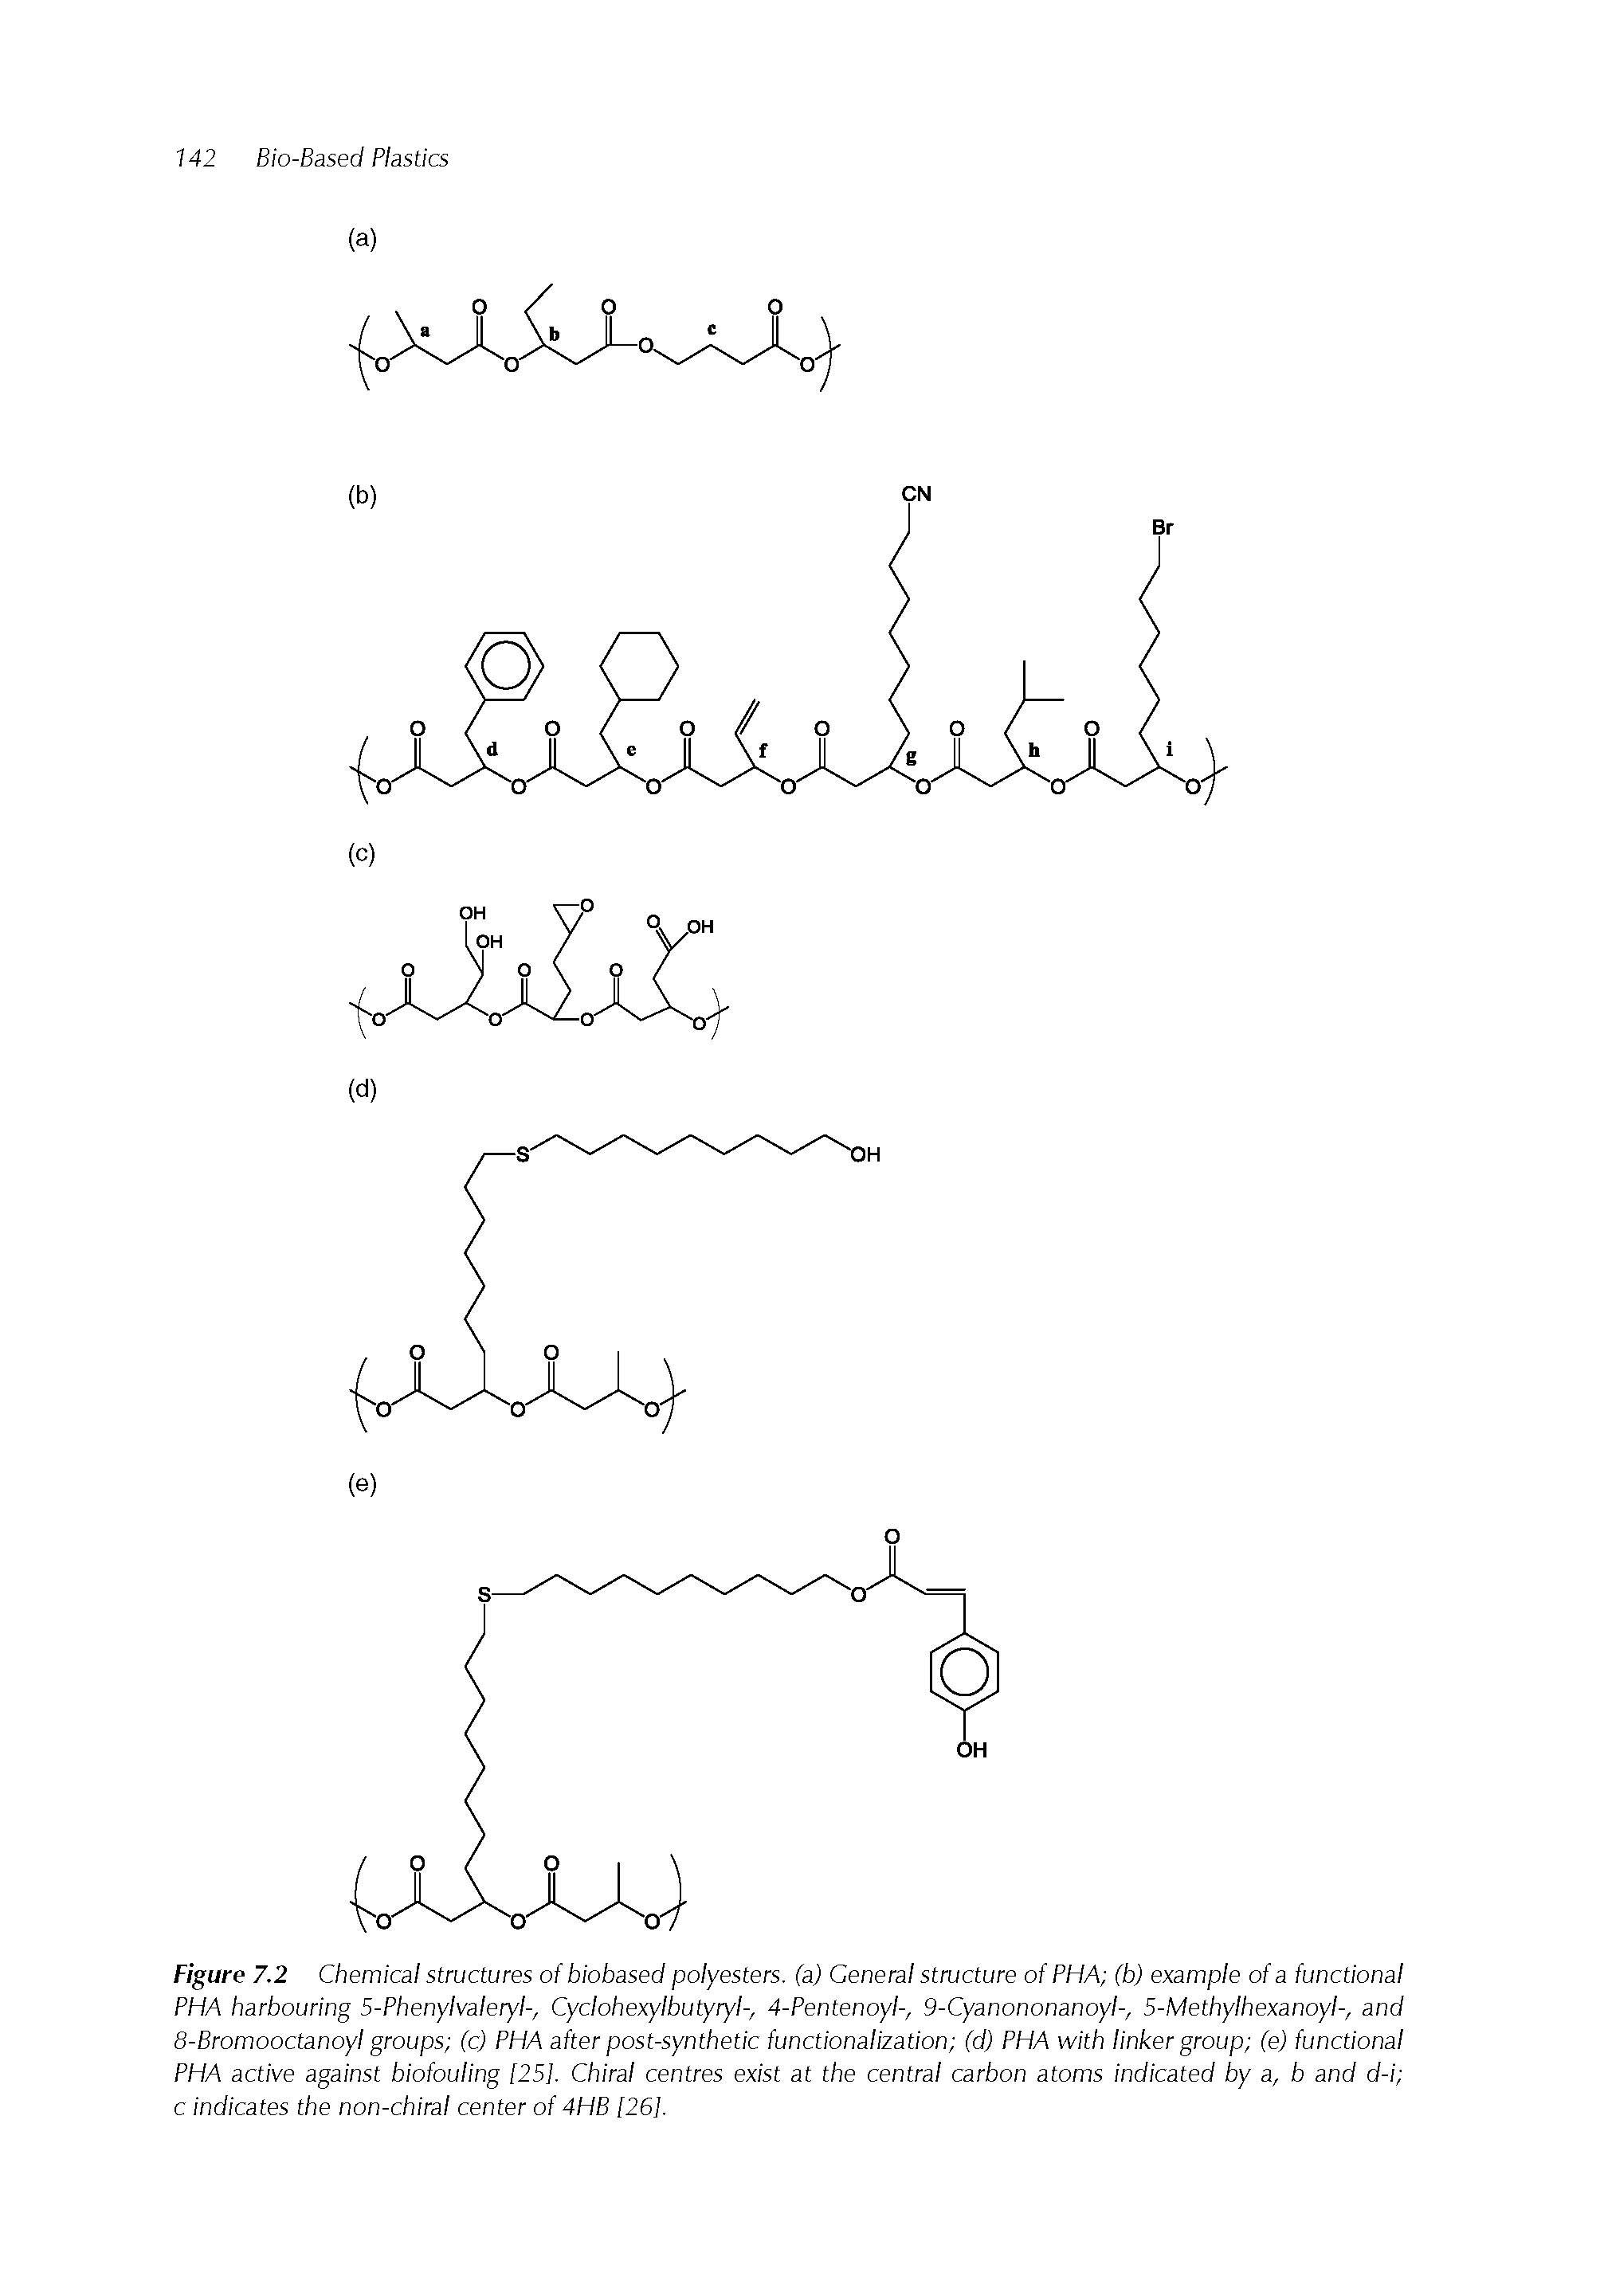 Figure 7.2 Chemical structures of biobased polyesters, (a) General structure of PHA (b) example of a functional PHA harbouring 5-Phenylvaleryl-, Cyclohexylbutyryl-, 4-Pentenoyl-, 9-Cyanononanoyl-, 5-Methylhexanoyl-, and 8-Bromooctanoyl groups (c) PHA after post-synthetic functionalization (d) PHA with linker group (e) functional PHA active against biofouling [25]. Chiral centres exist at the central carbon atoms indicated by a, b and d-i c indicates the non-chiral center of 4HB 126],...